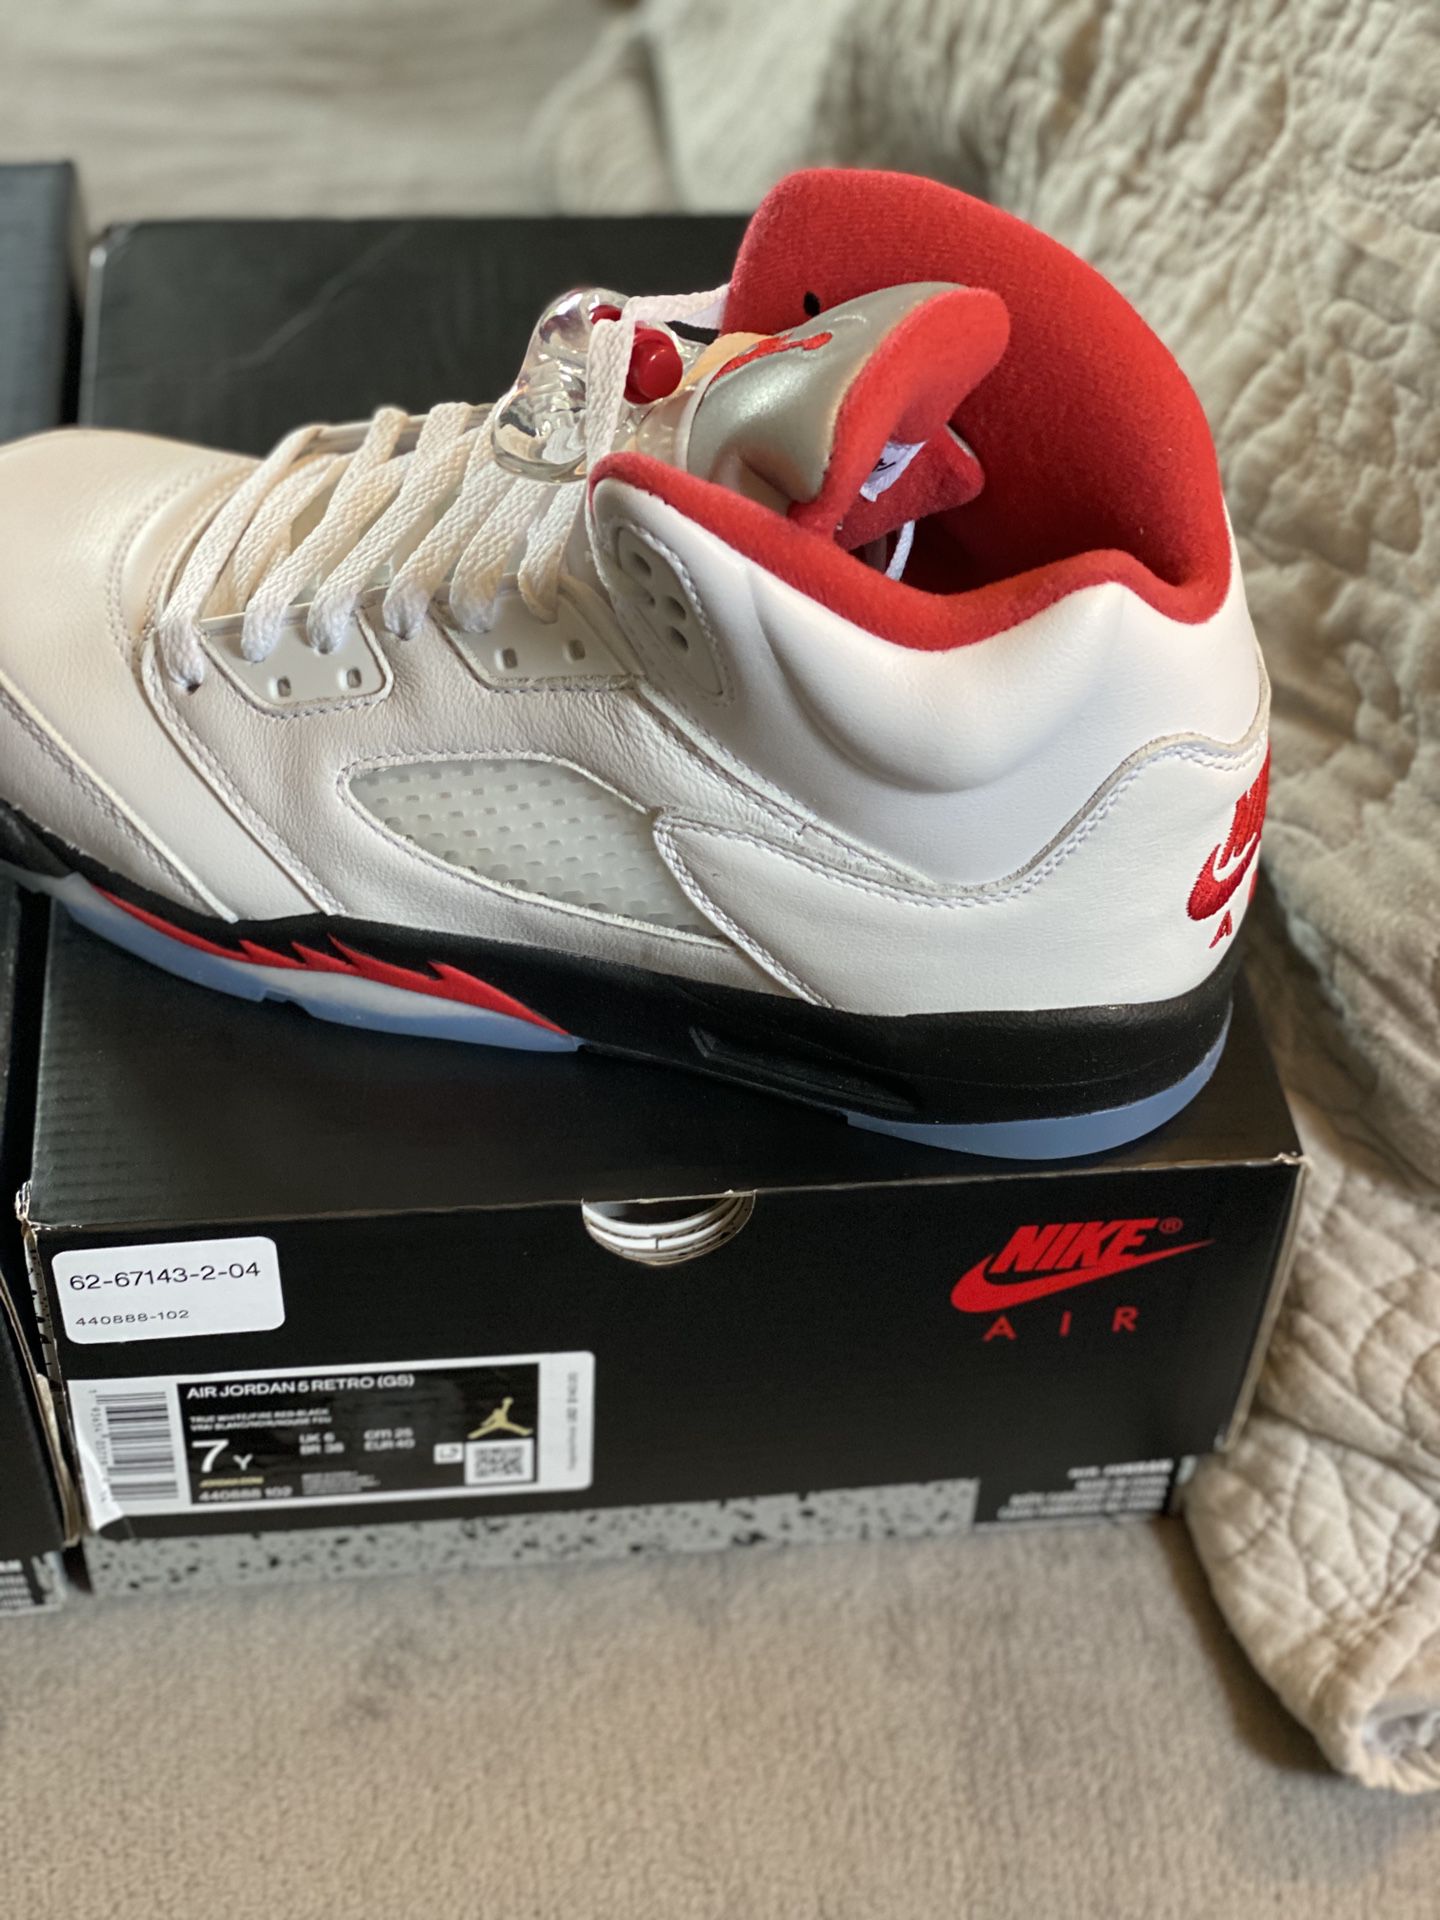 7y Jordan 5 retro Brand new with proof of purchase